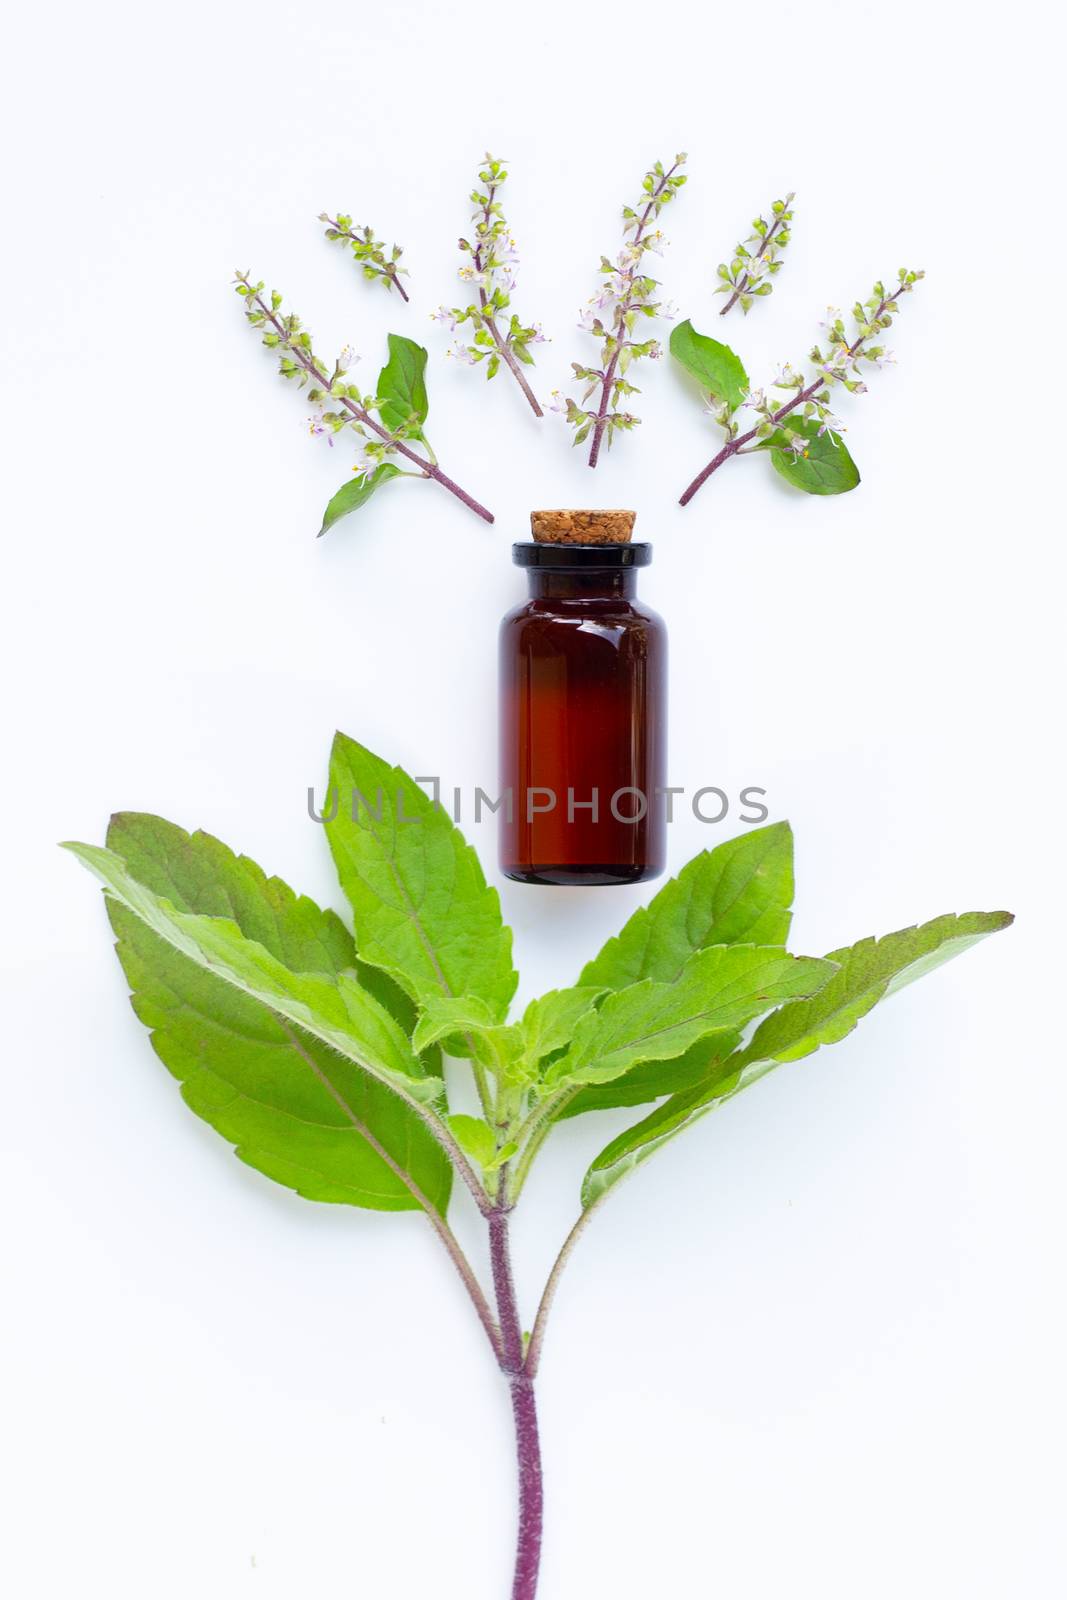 Holy basil essential oil with holy basil leaves and flower on white background.